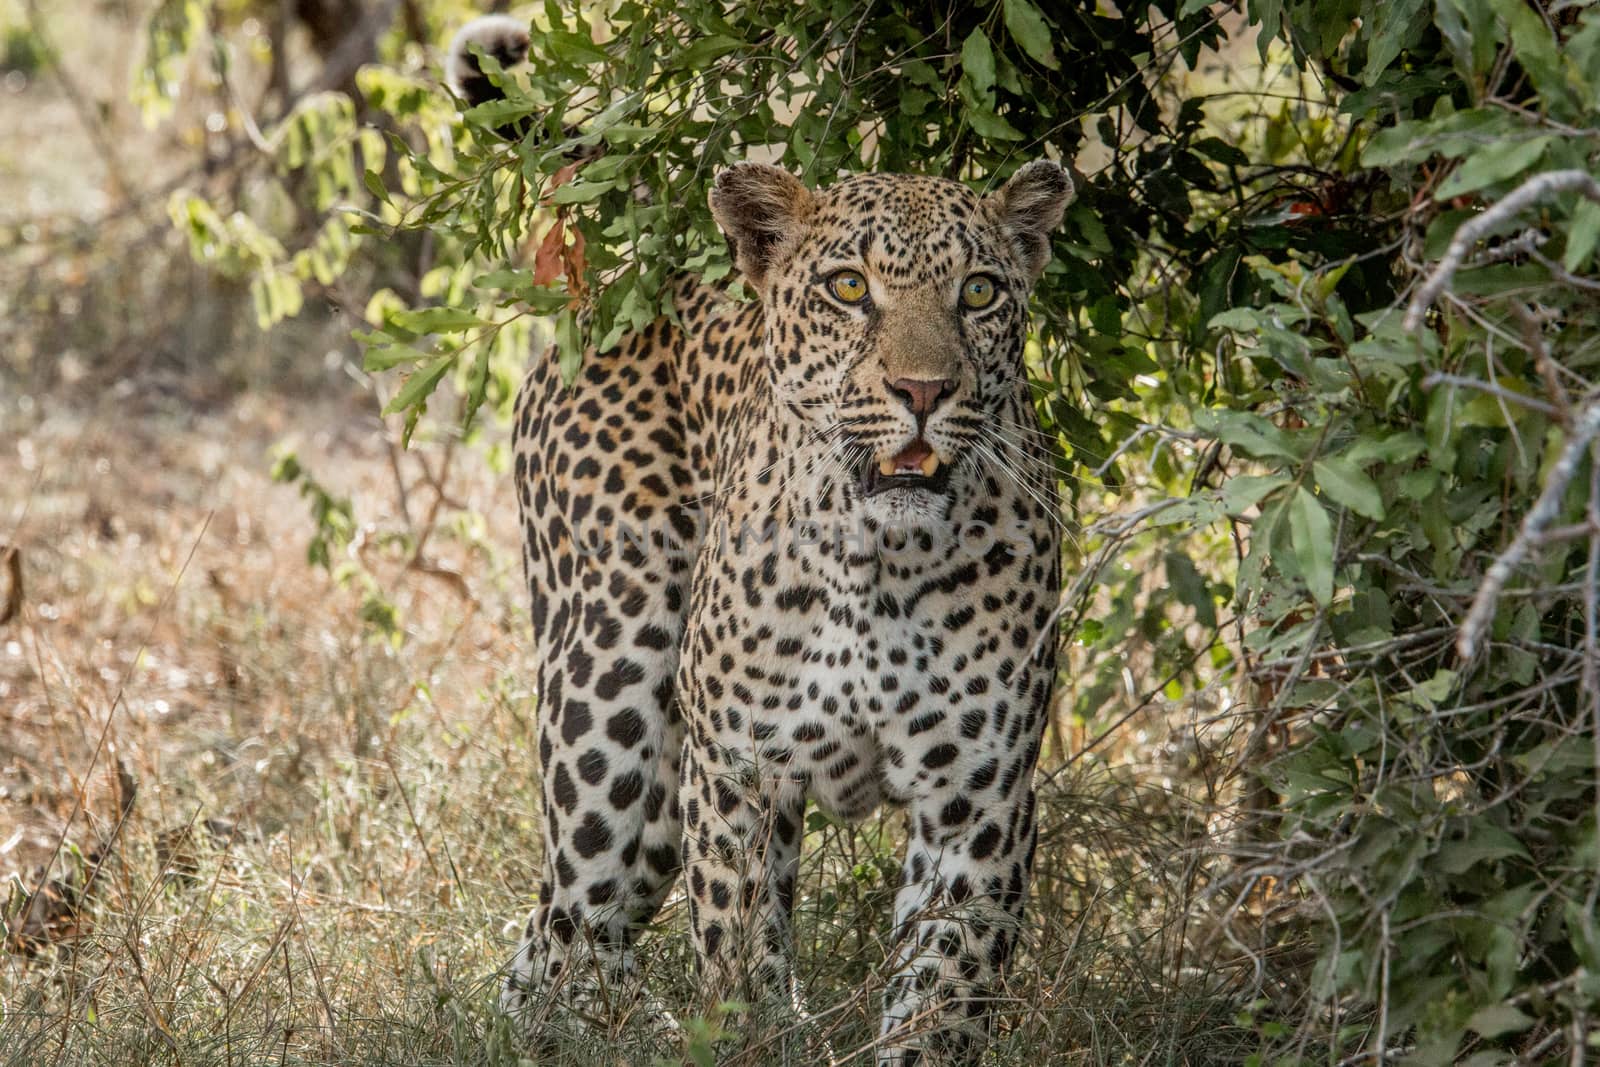 Starring Leopard in the Kruger National Park, South Africa. by Simoneemanphotography